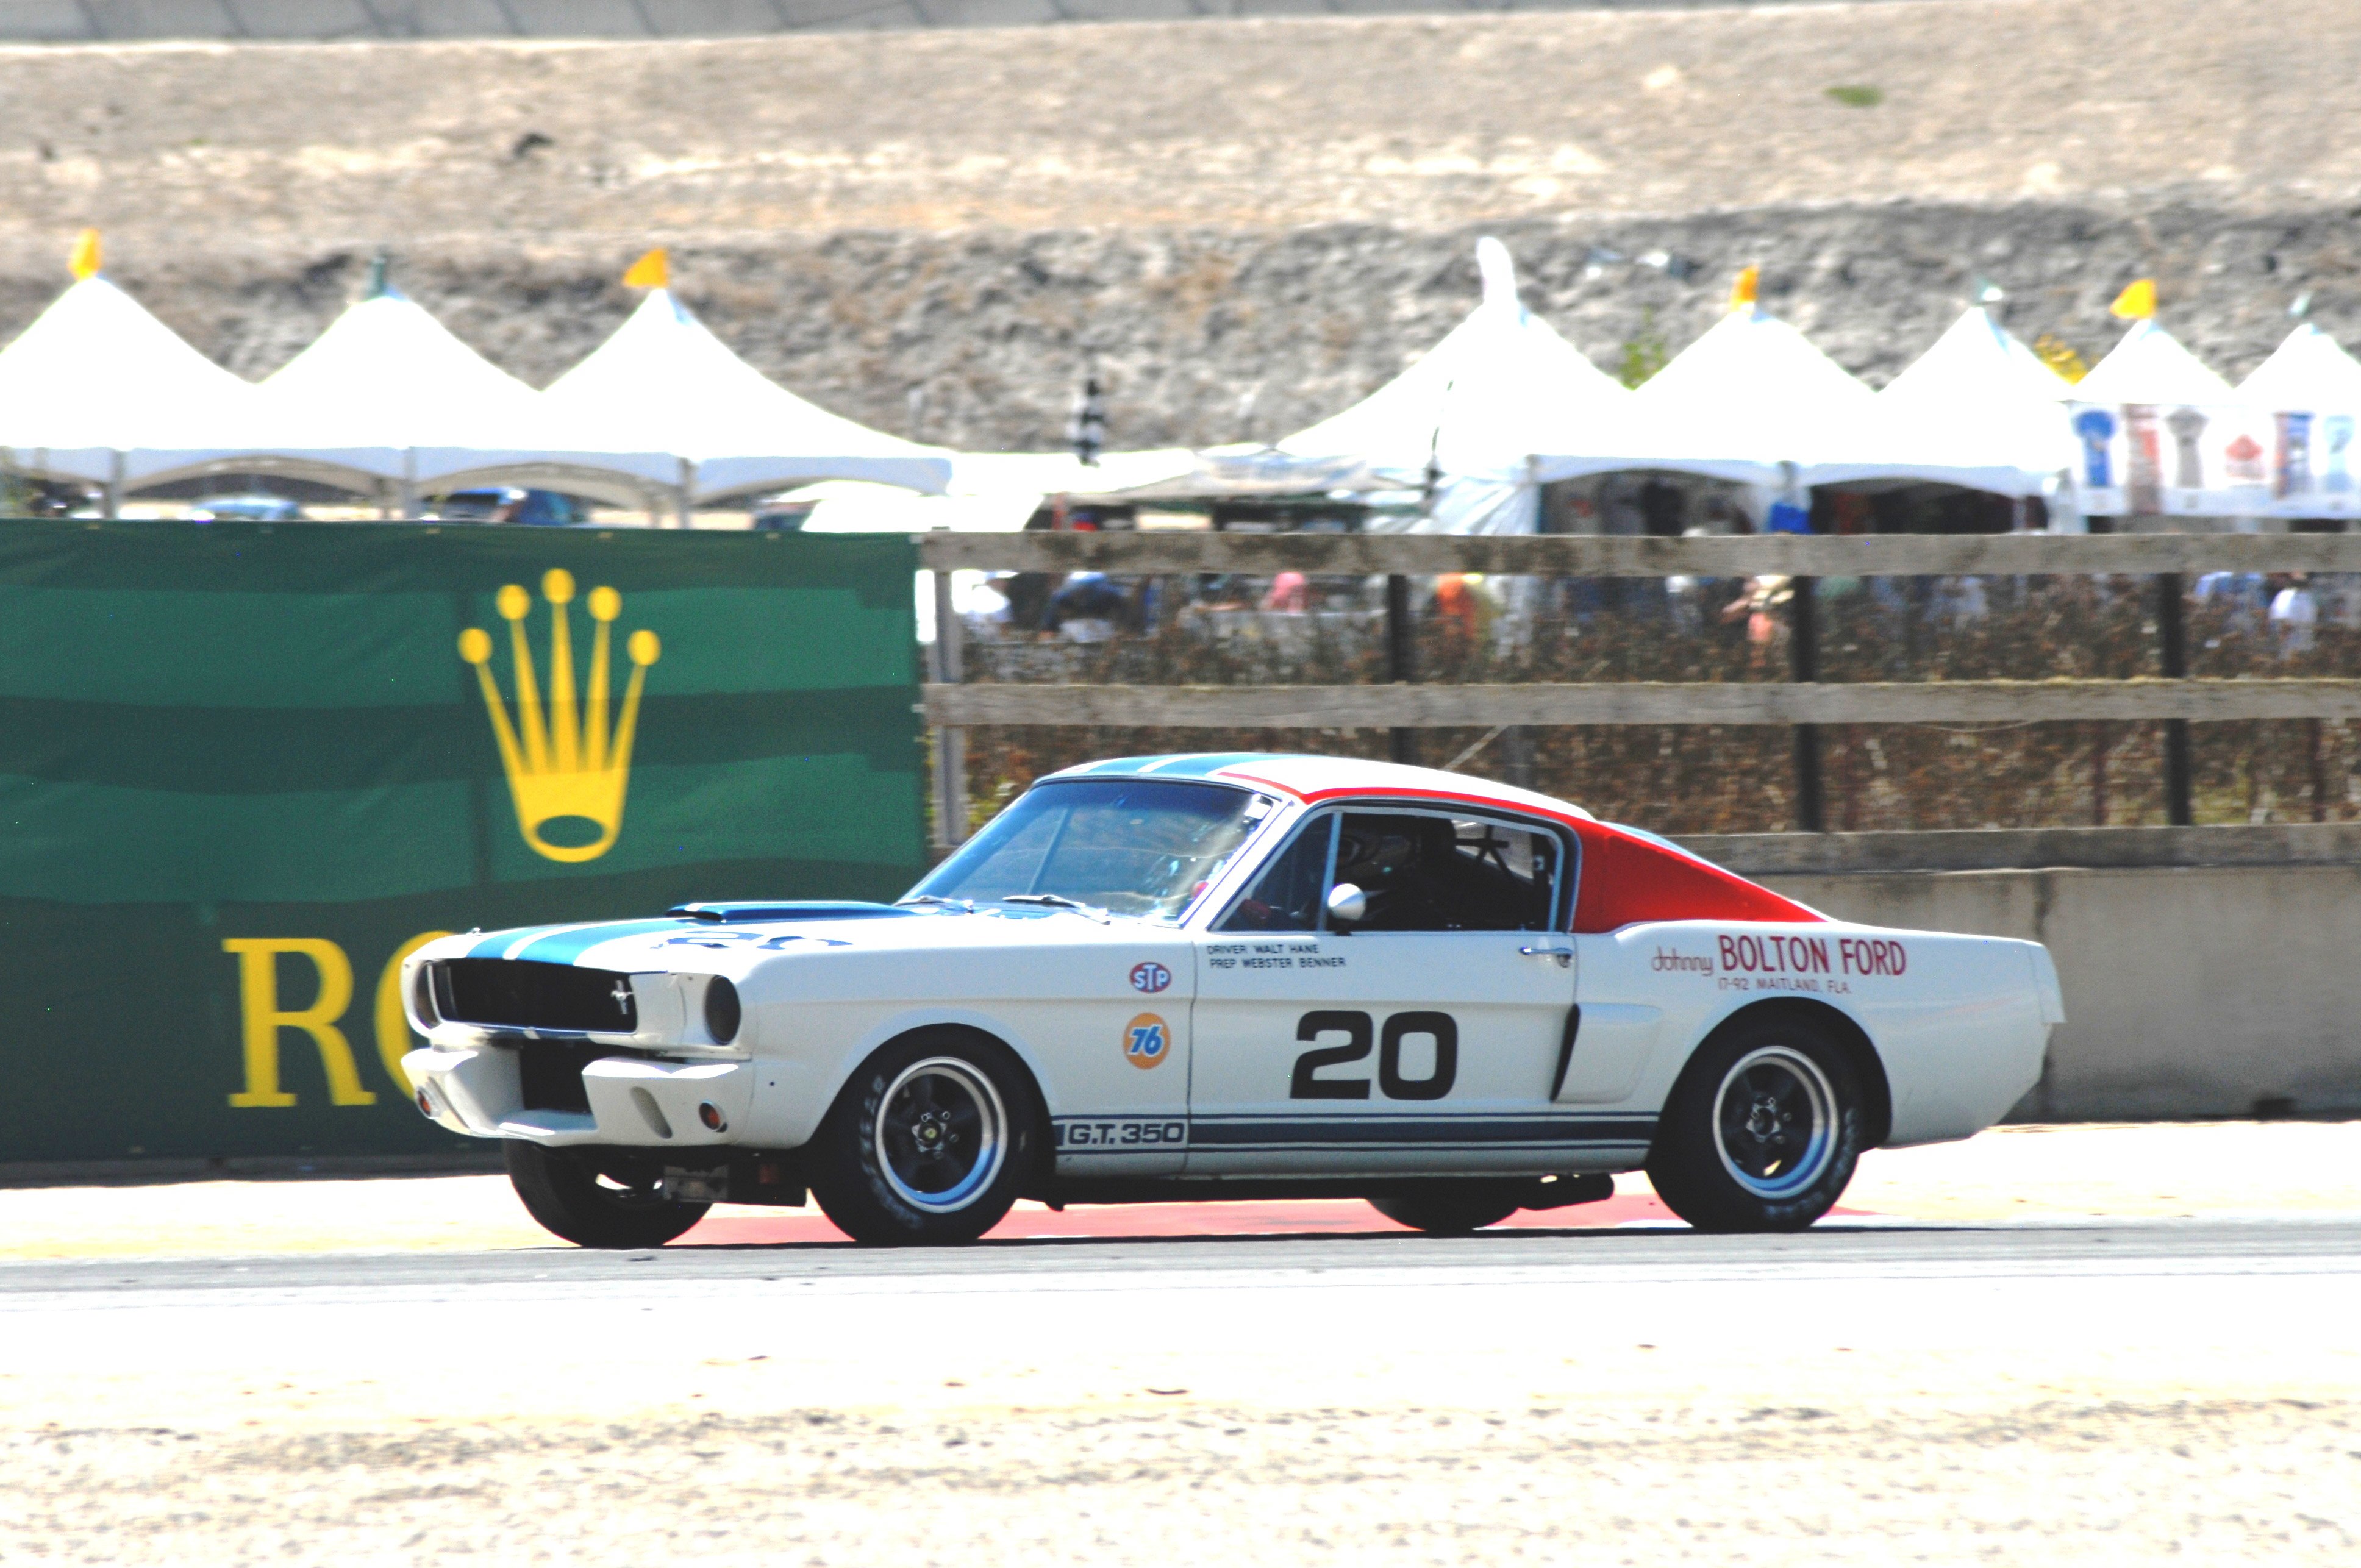 Car Fastback Muscle Car Race Car Shelby Mustang Gt350 White Car 3872x2572